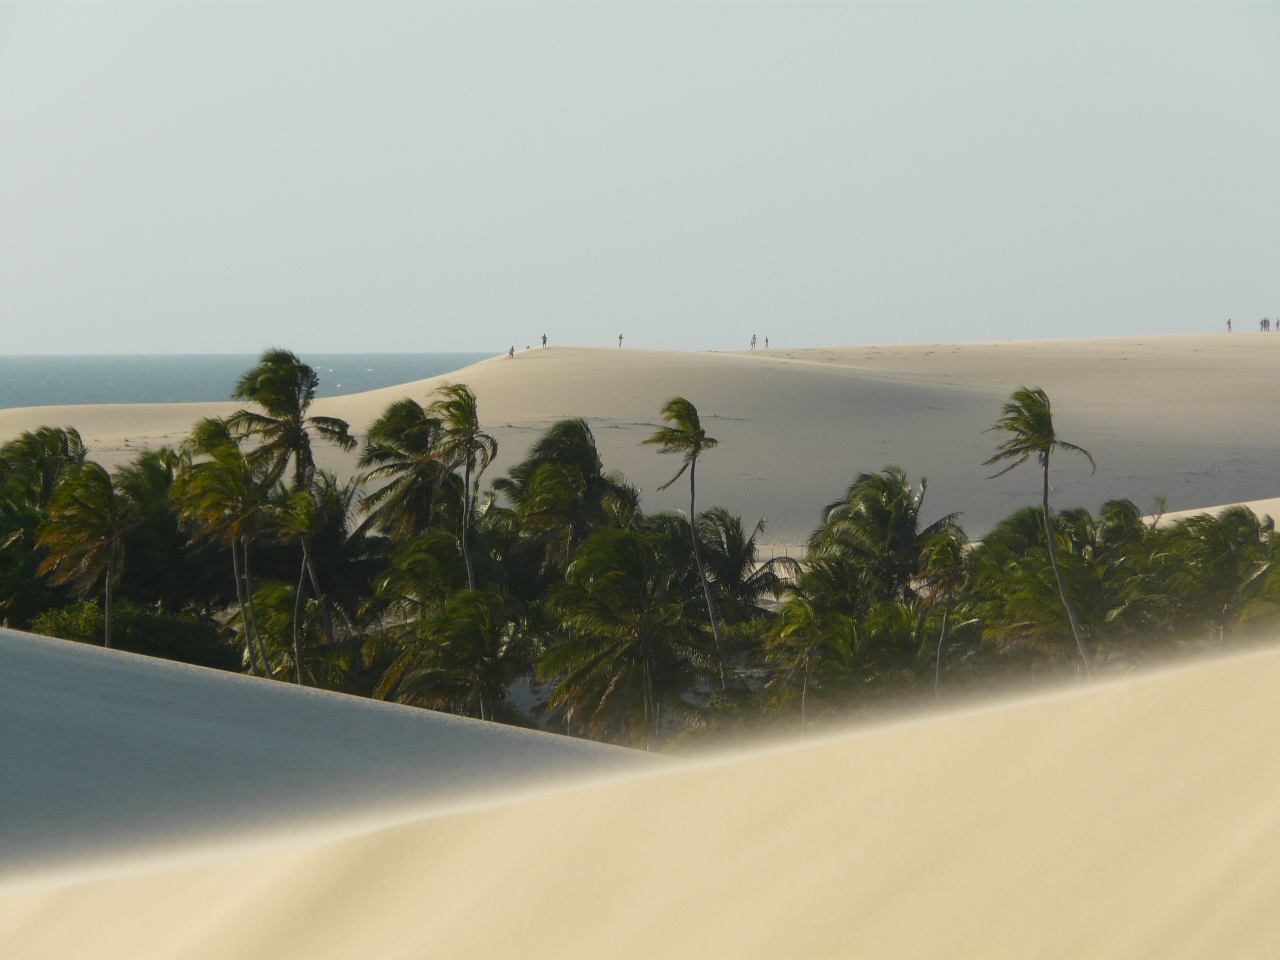 A windy day up in the dunes in Jericoacoara. 